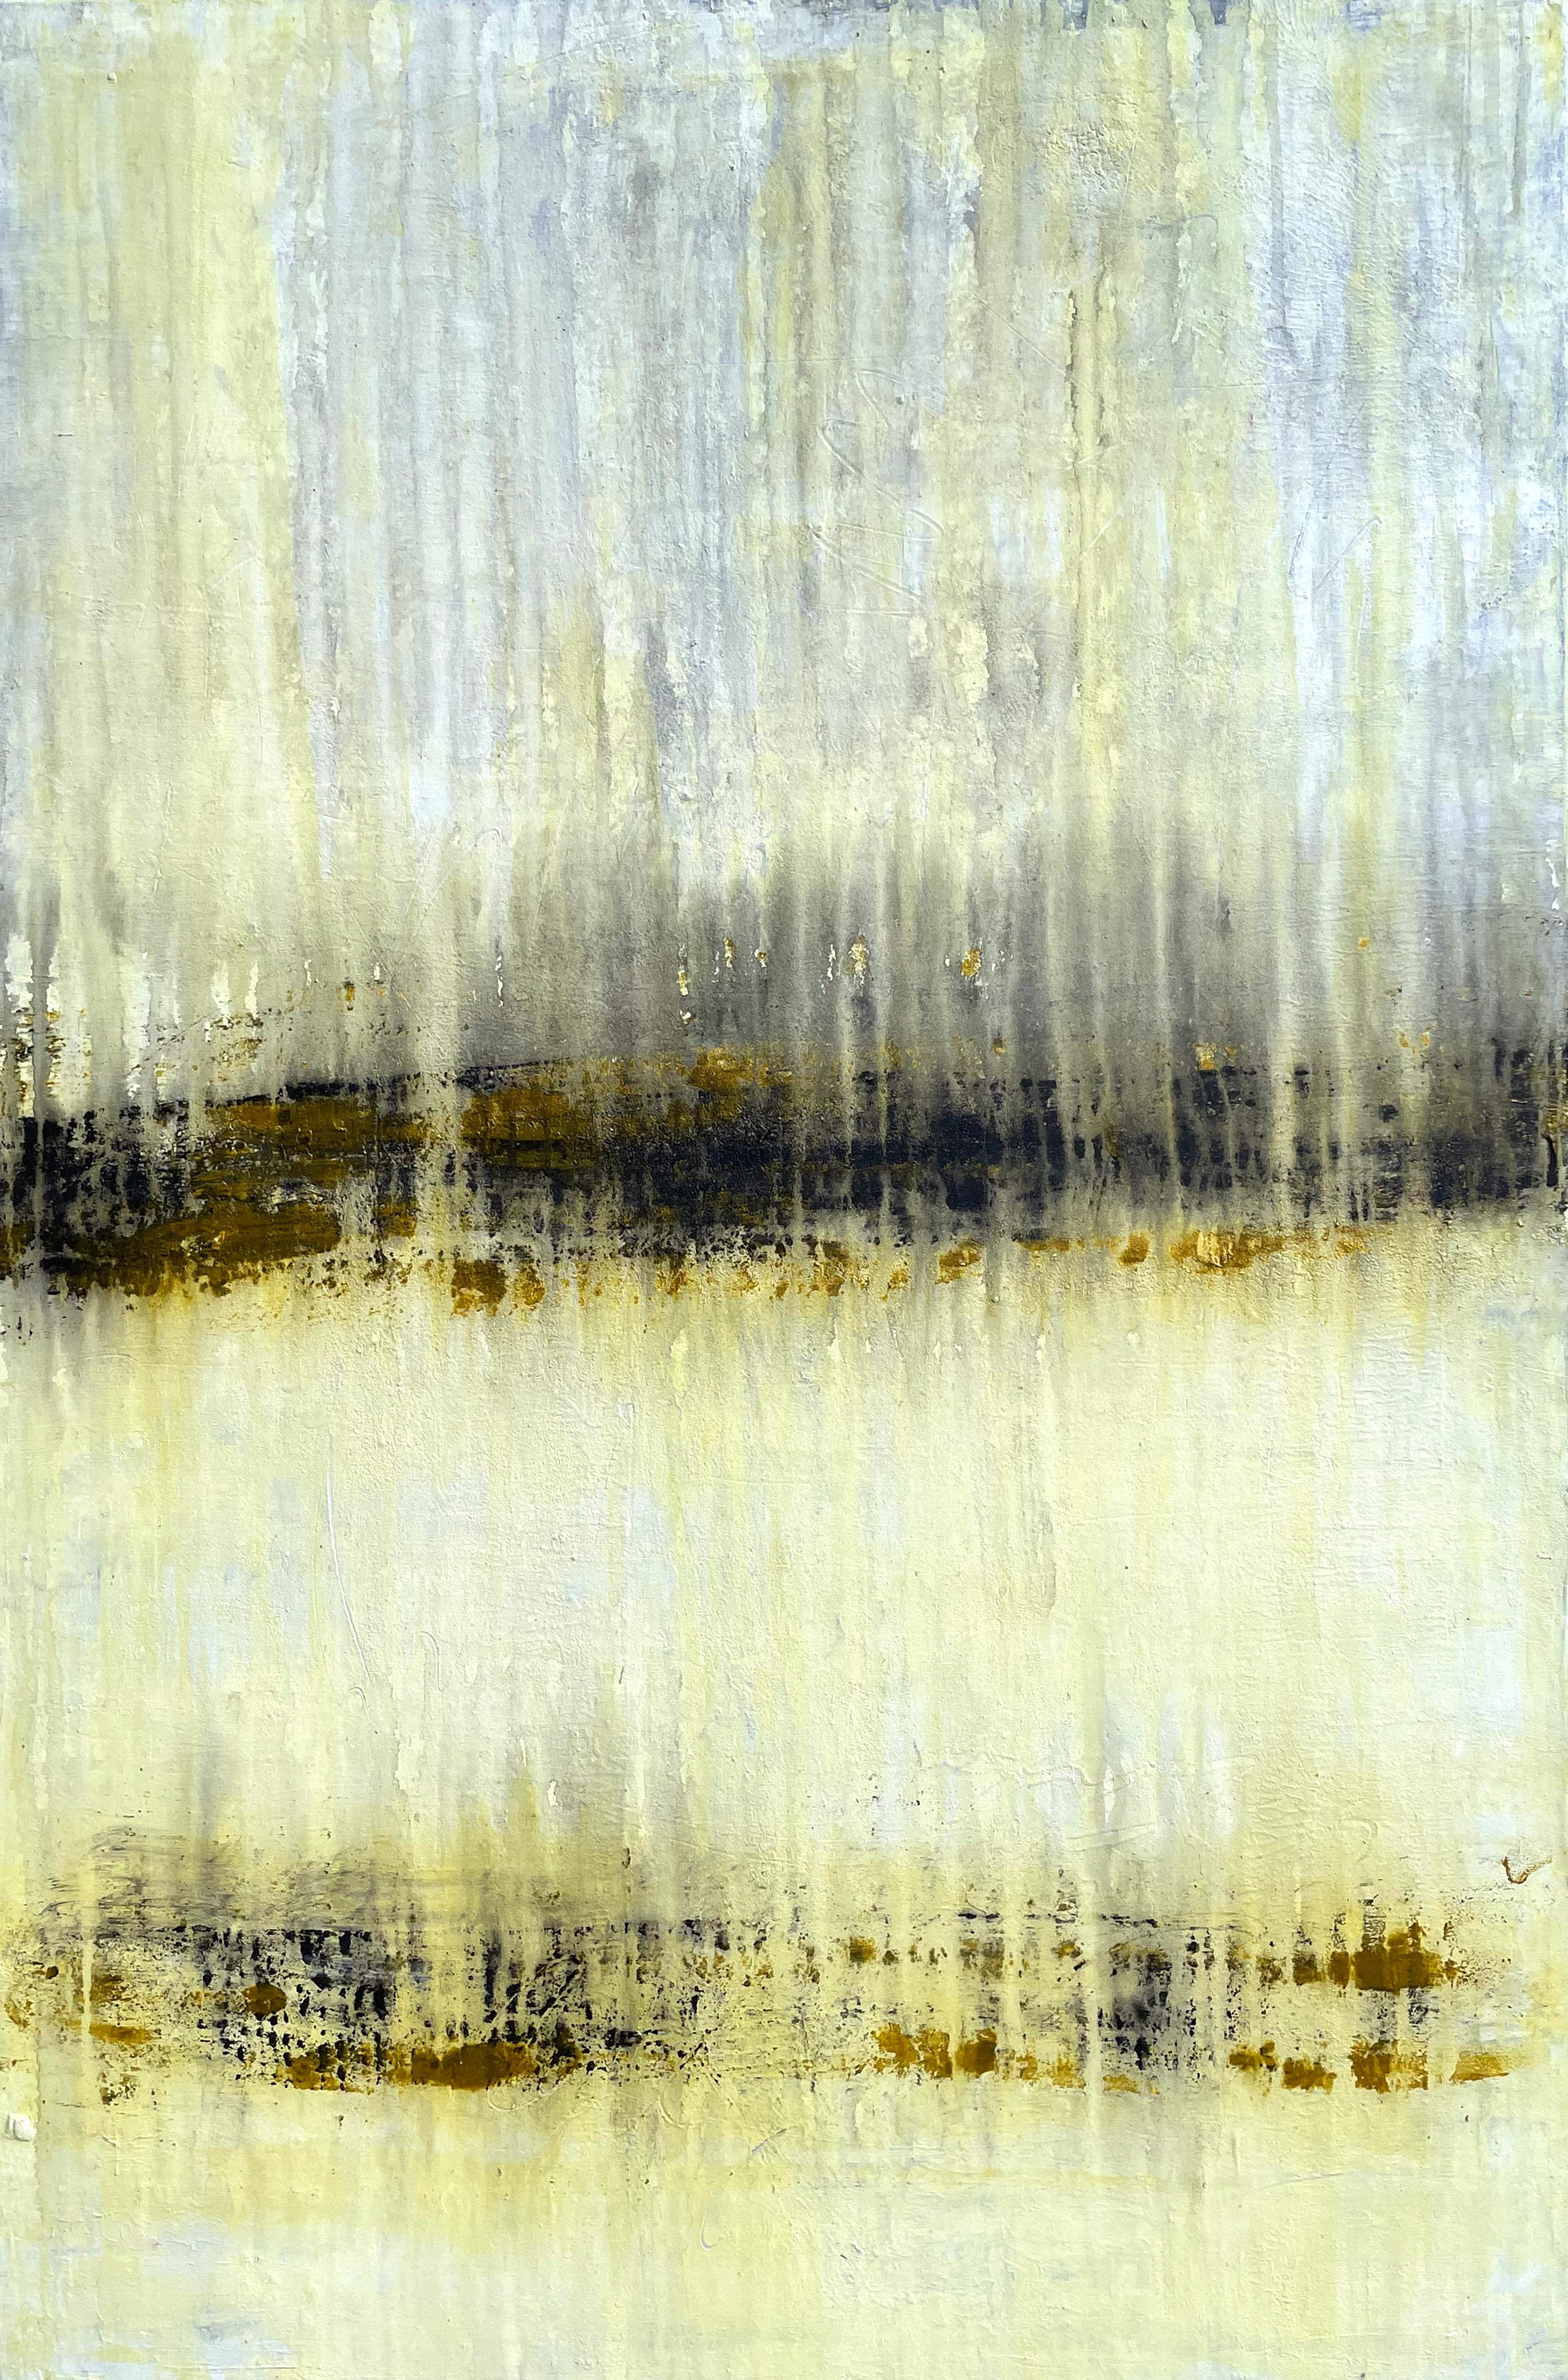 Roger König Landscape Painting - "Antique Gold Series" AA2E, Landscape, Abstract Painting, 21st Century, Acrylic